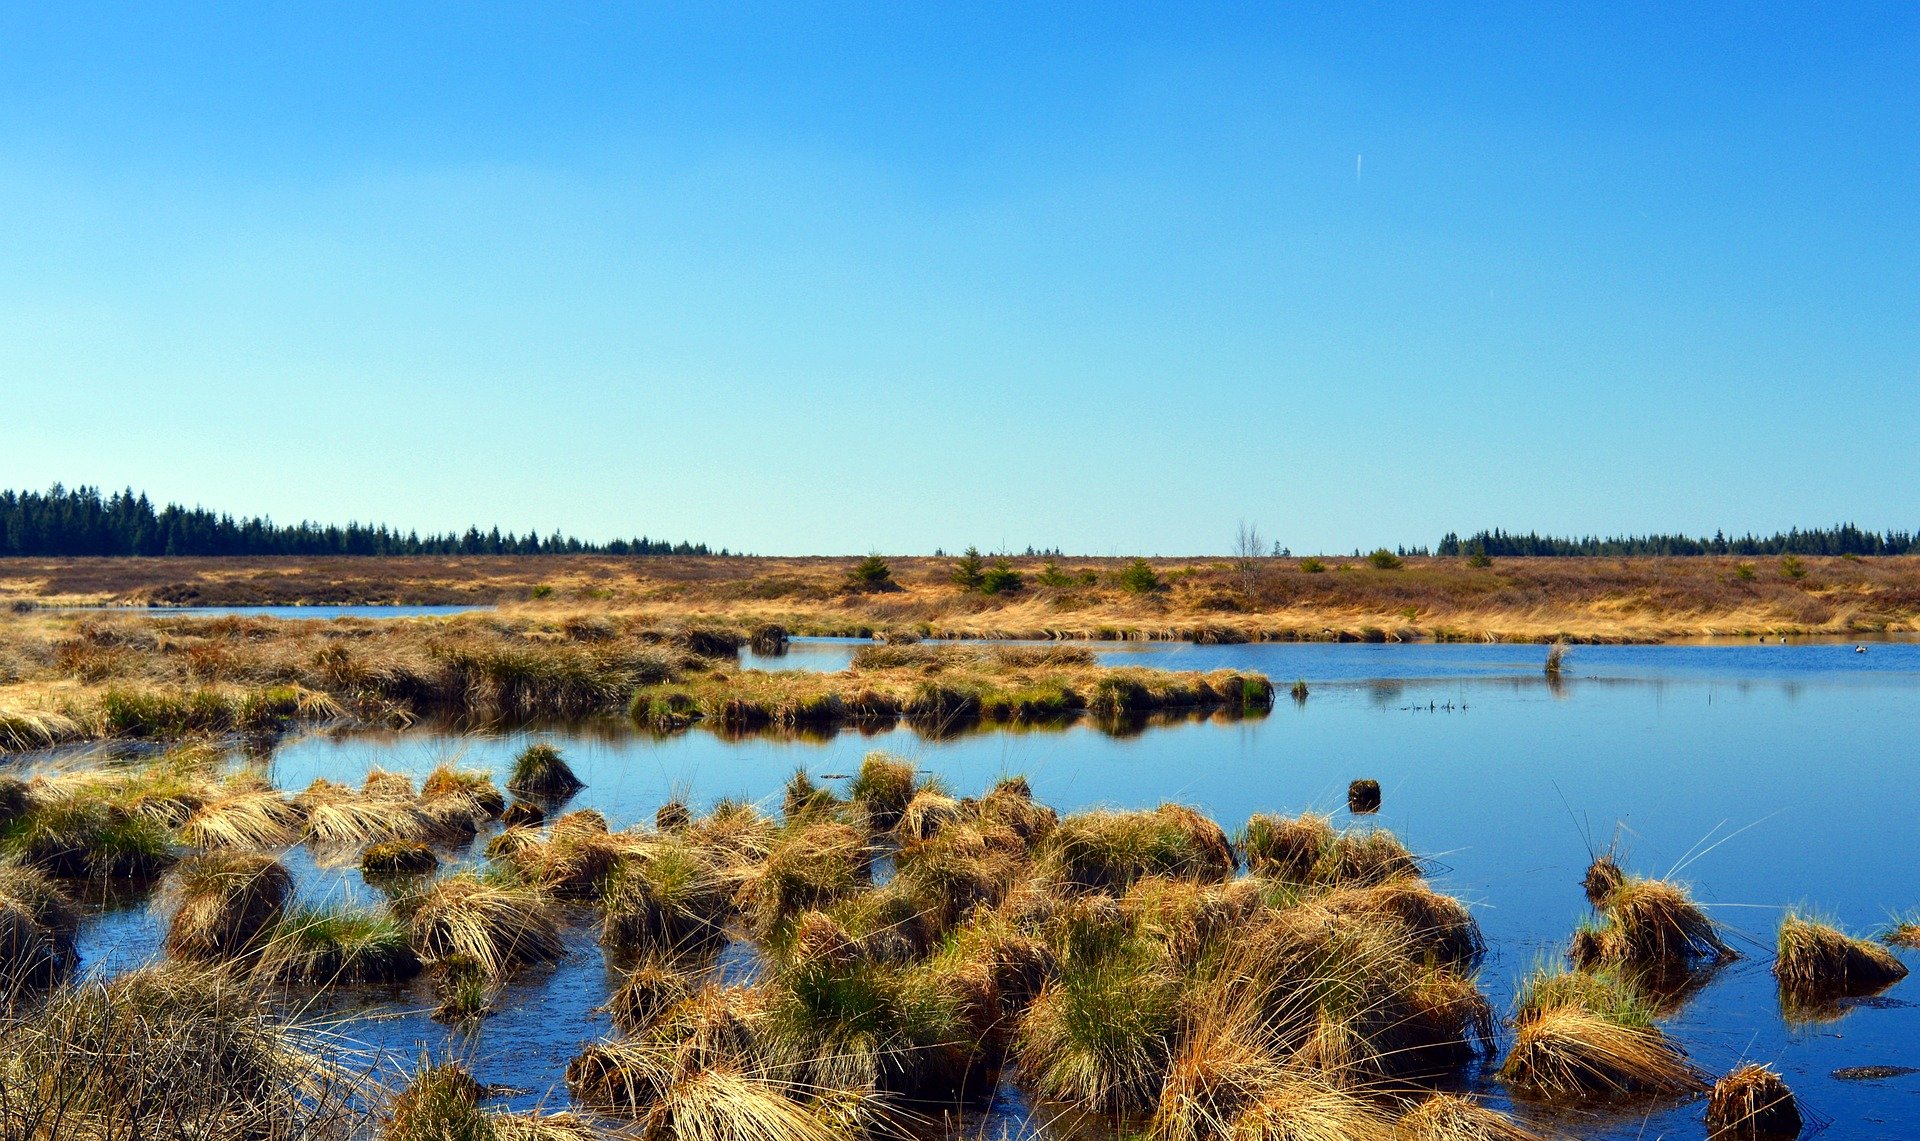 Peatlands occupy roughly 2% or 3% of the land’s surface but we don’t know how deep they go. Image credit - Marisa04/ Pixabay